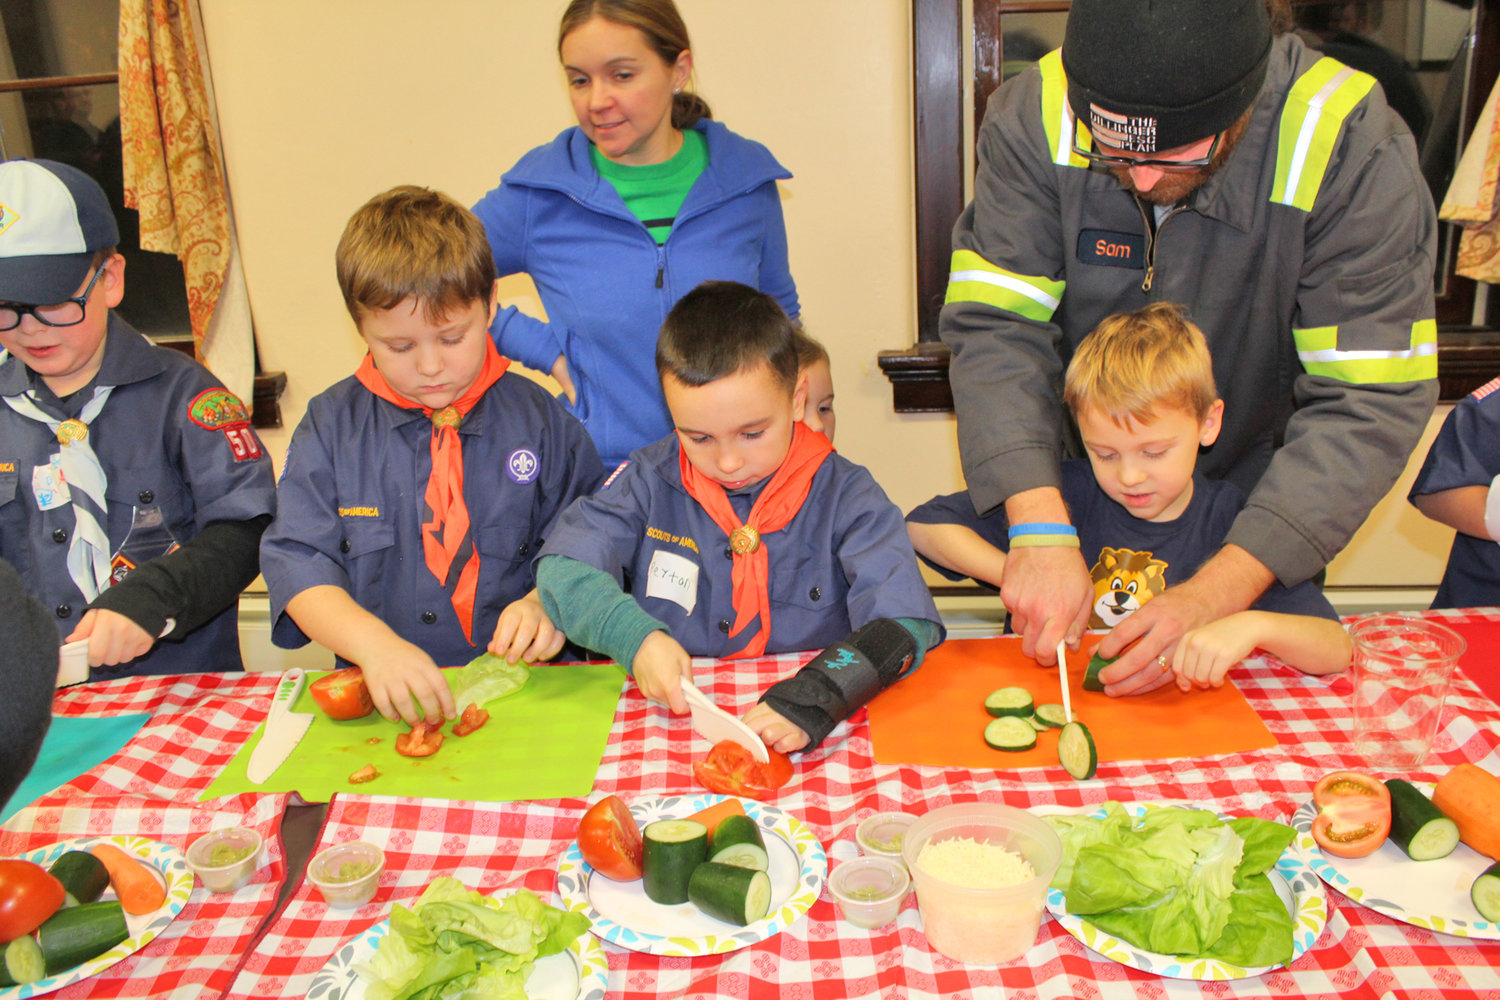 SLICE AND DICE — Troops from Boy Scout Pack 50 of Rome, assisted by a couple parents, learn the proper and safe way to slice vegetables as they prepare hummus wraps with members of the Hamilton College Bon Appetit team.